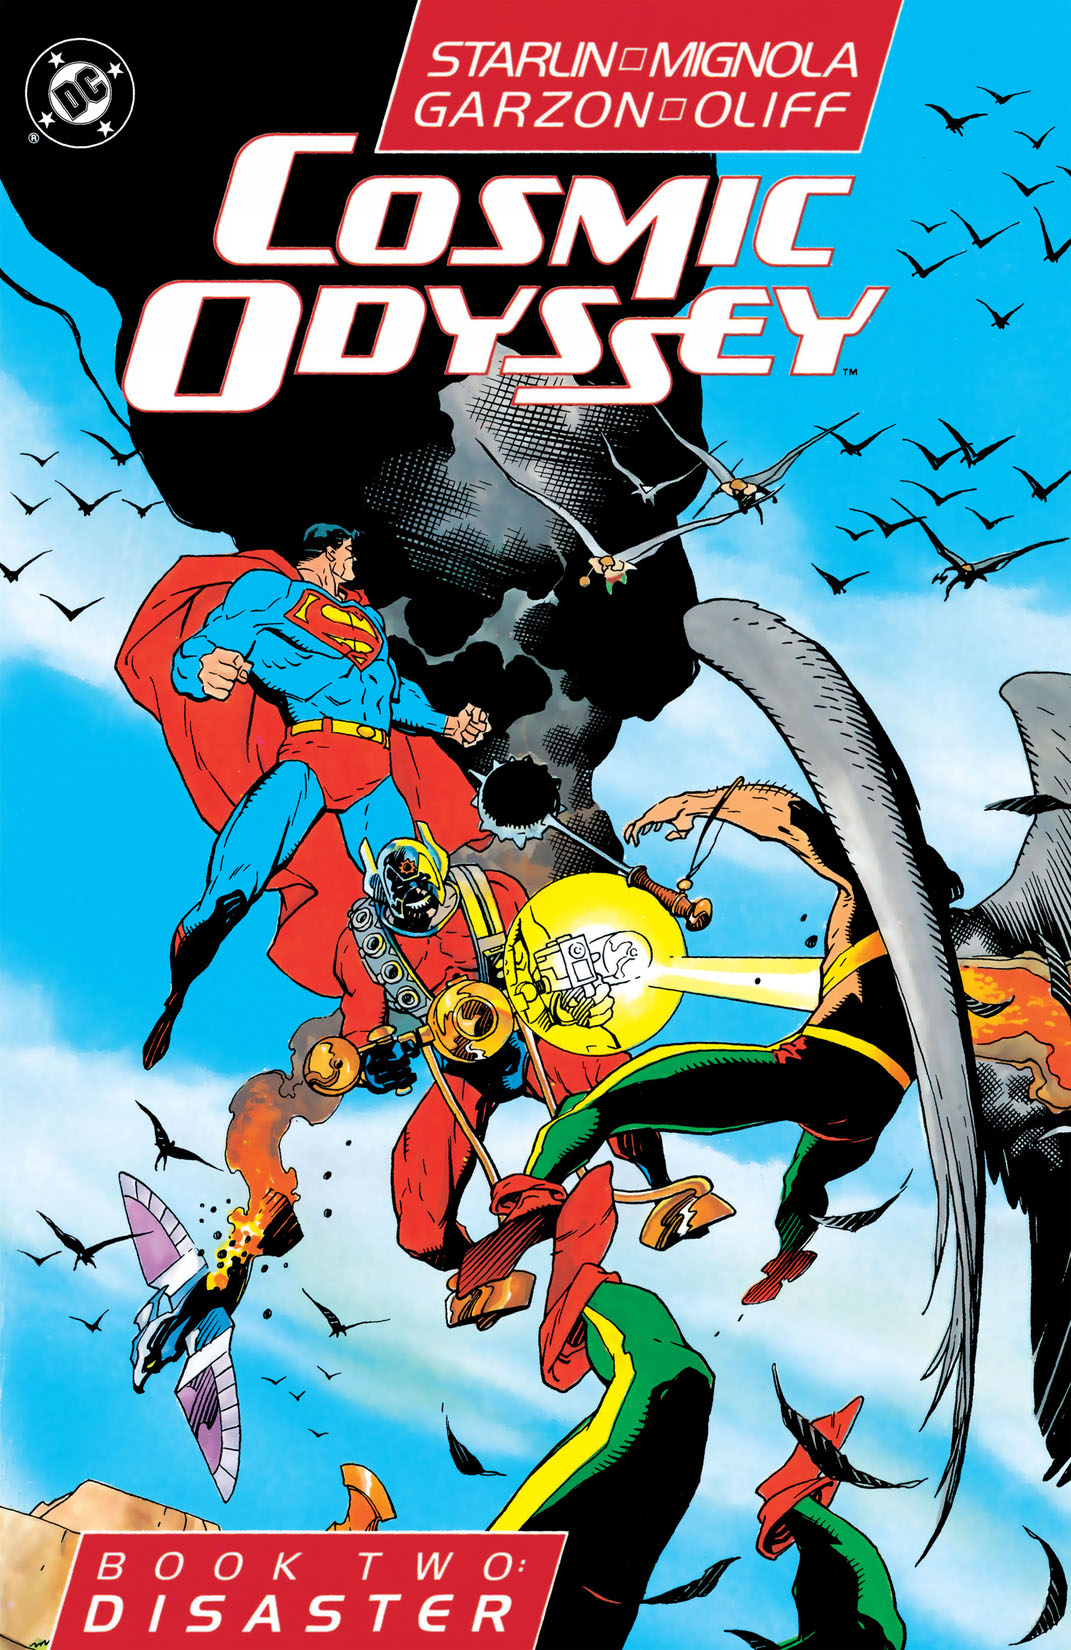 Cosmic Odyssey #2 preview images